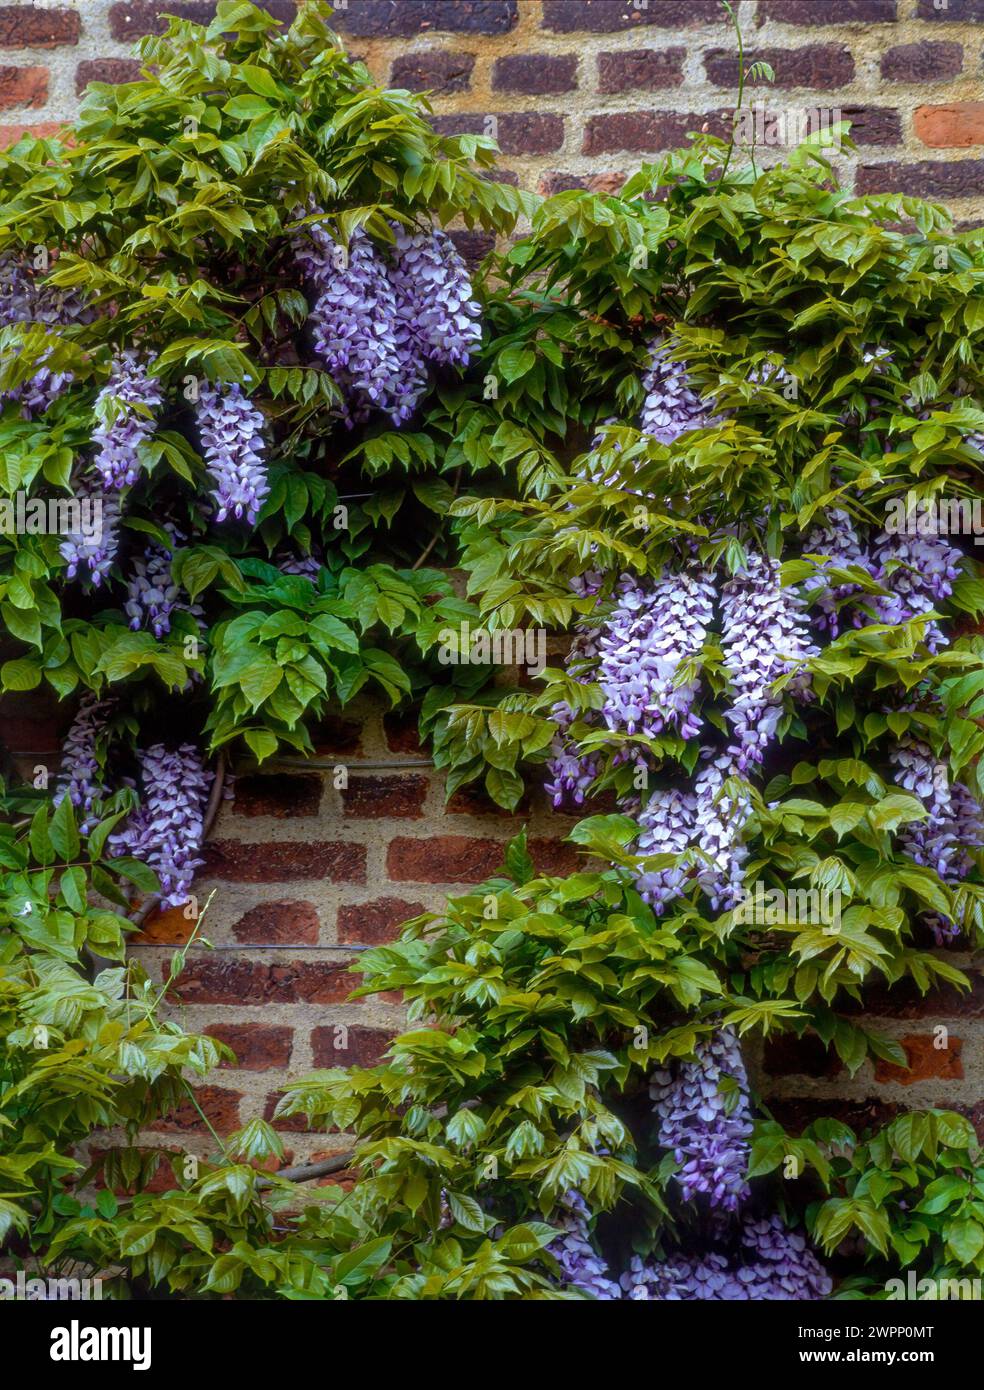 Wire trained Wisteria climber with lilac blue flowers growing against old flush pointed brown brick wall, England, UK Stock Photo